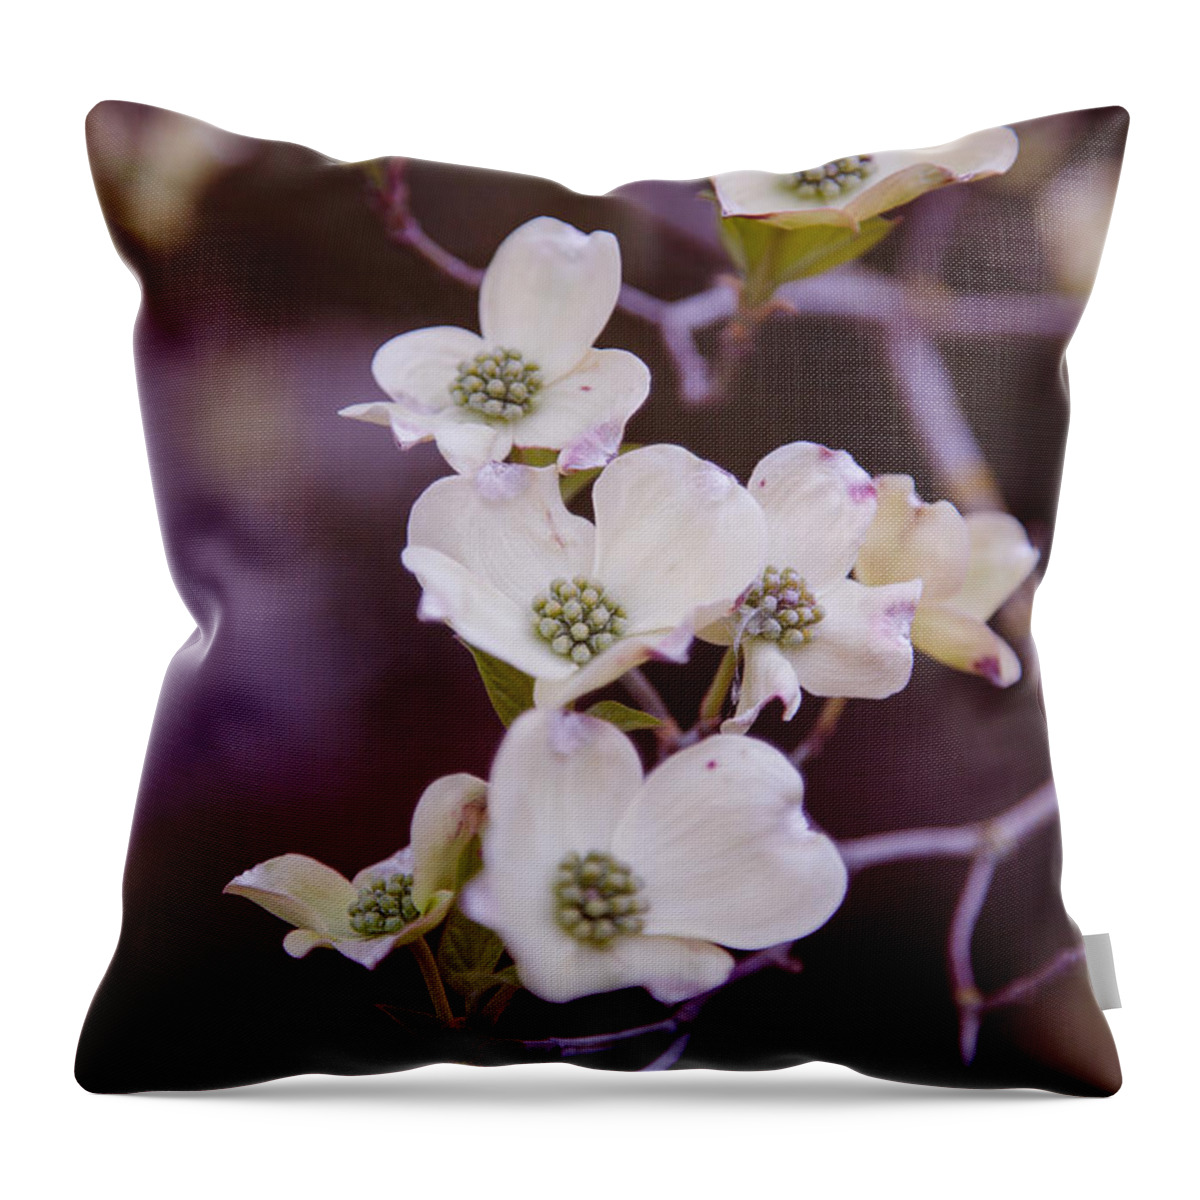 Bellingham Throw Pillow featuring the photograph Wedding White Dogwood by Judy Wright Lott